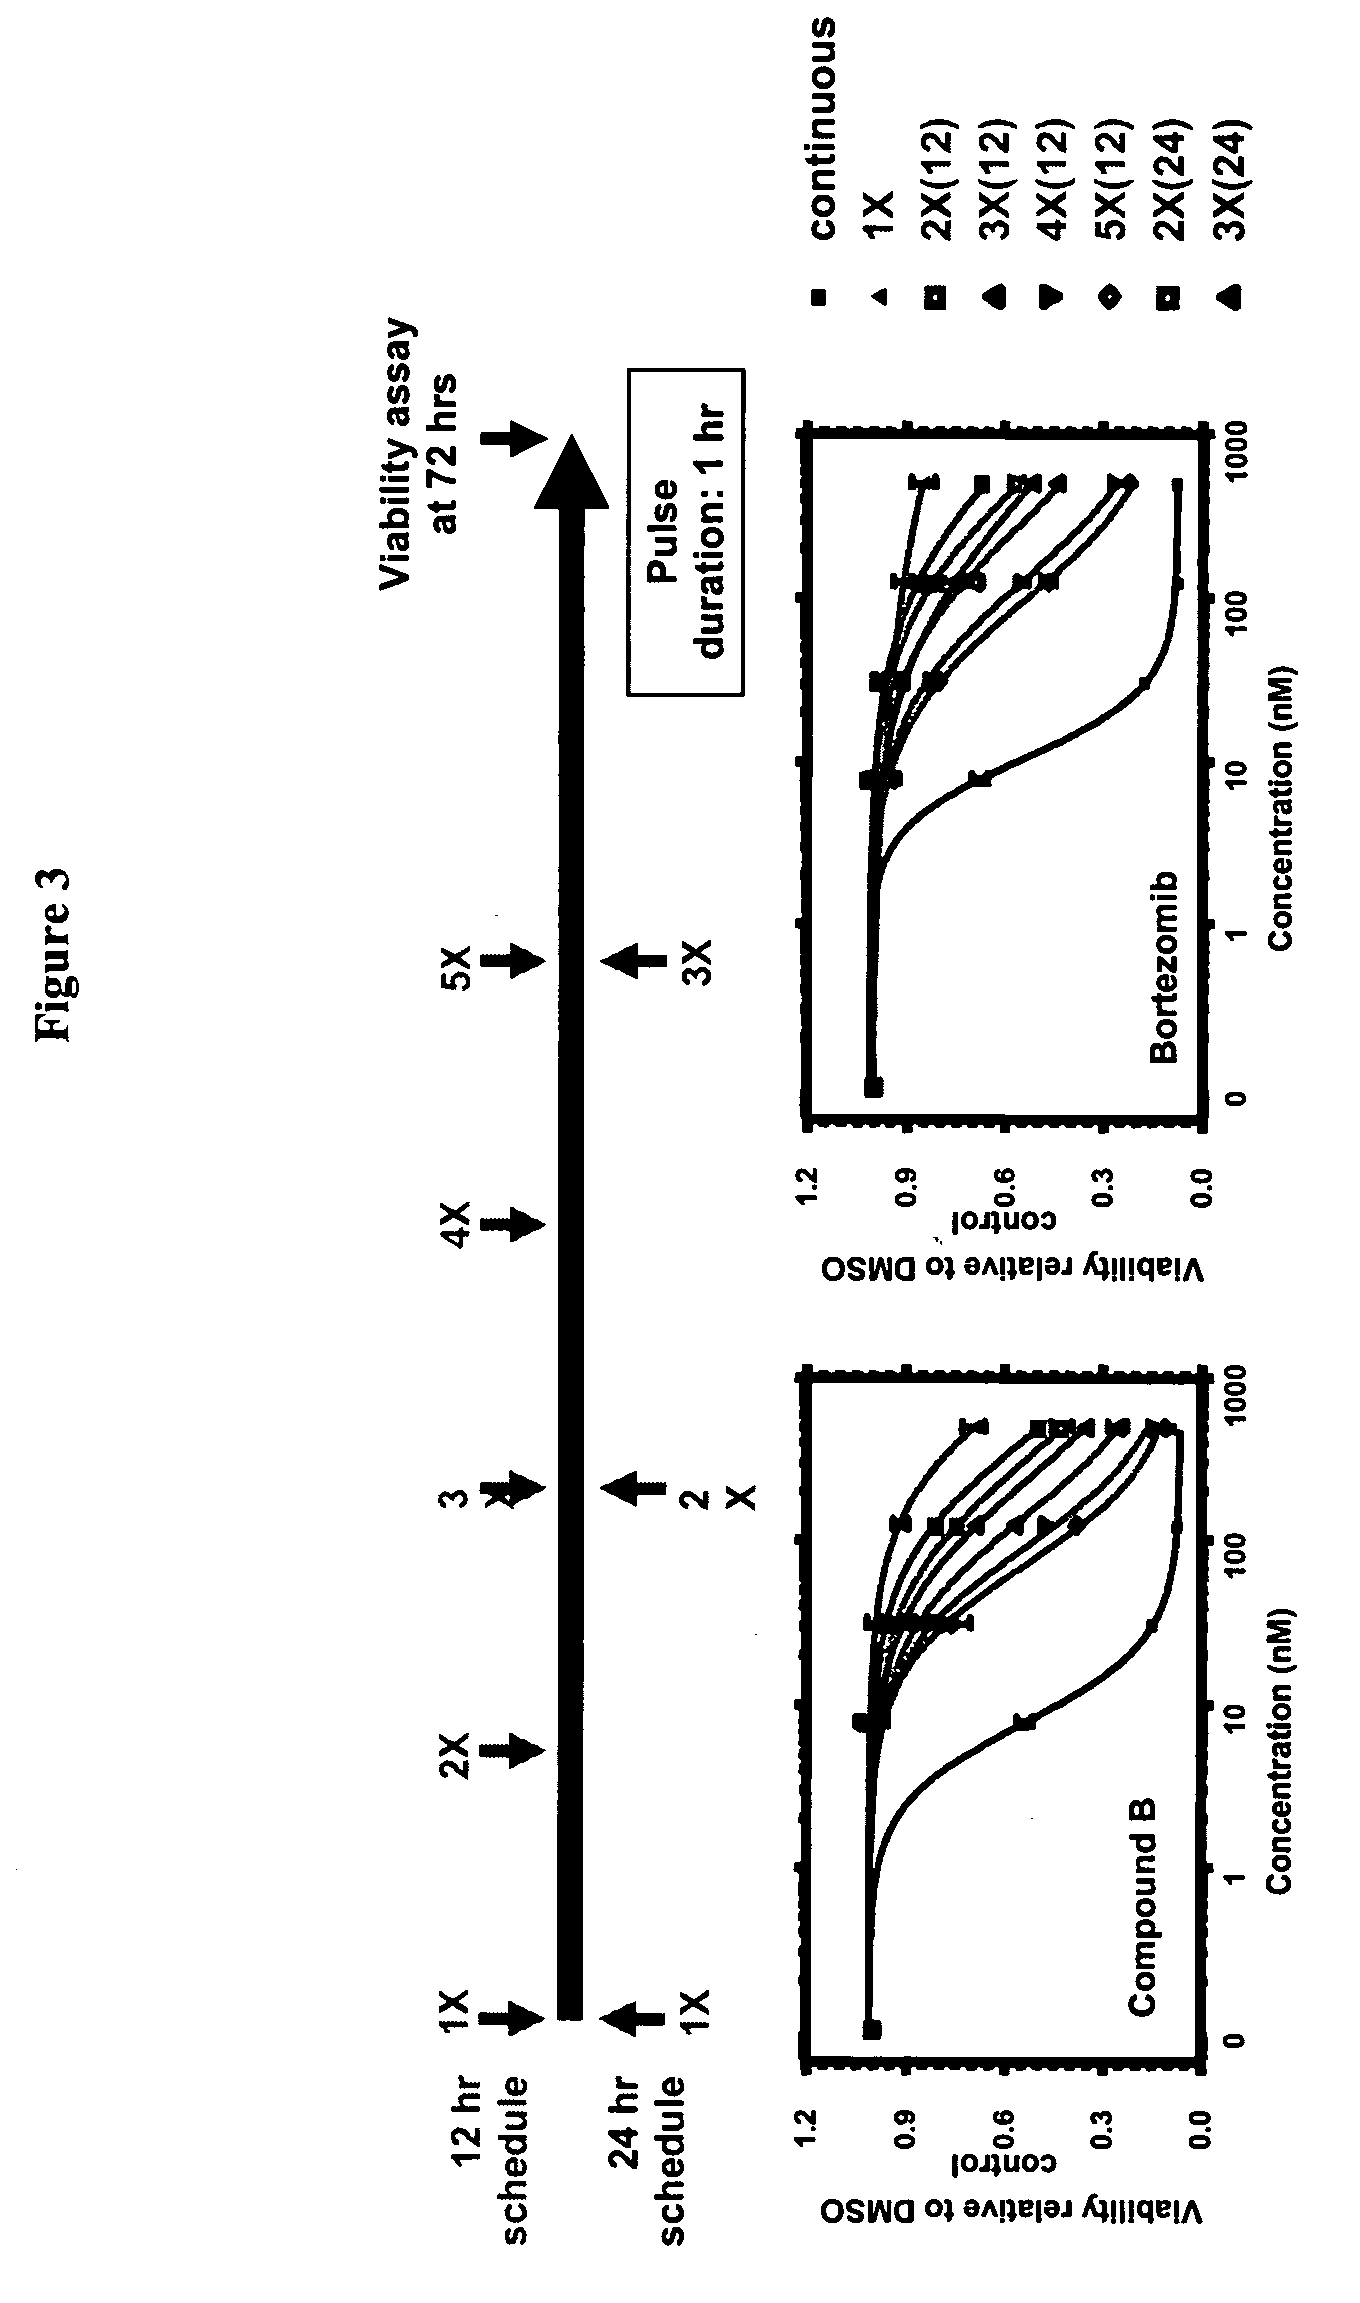 Methods for enzyme inhibition